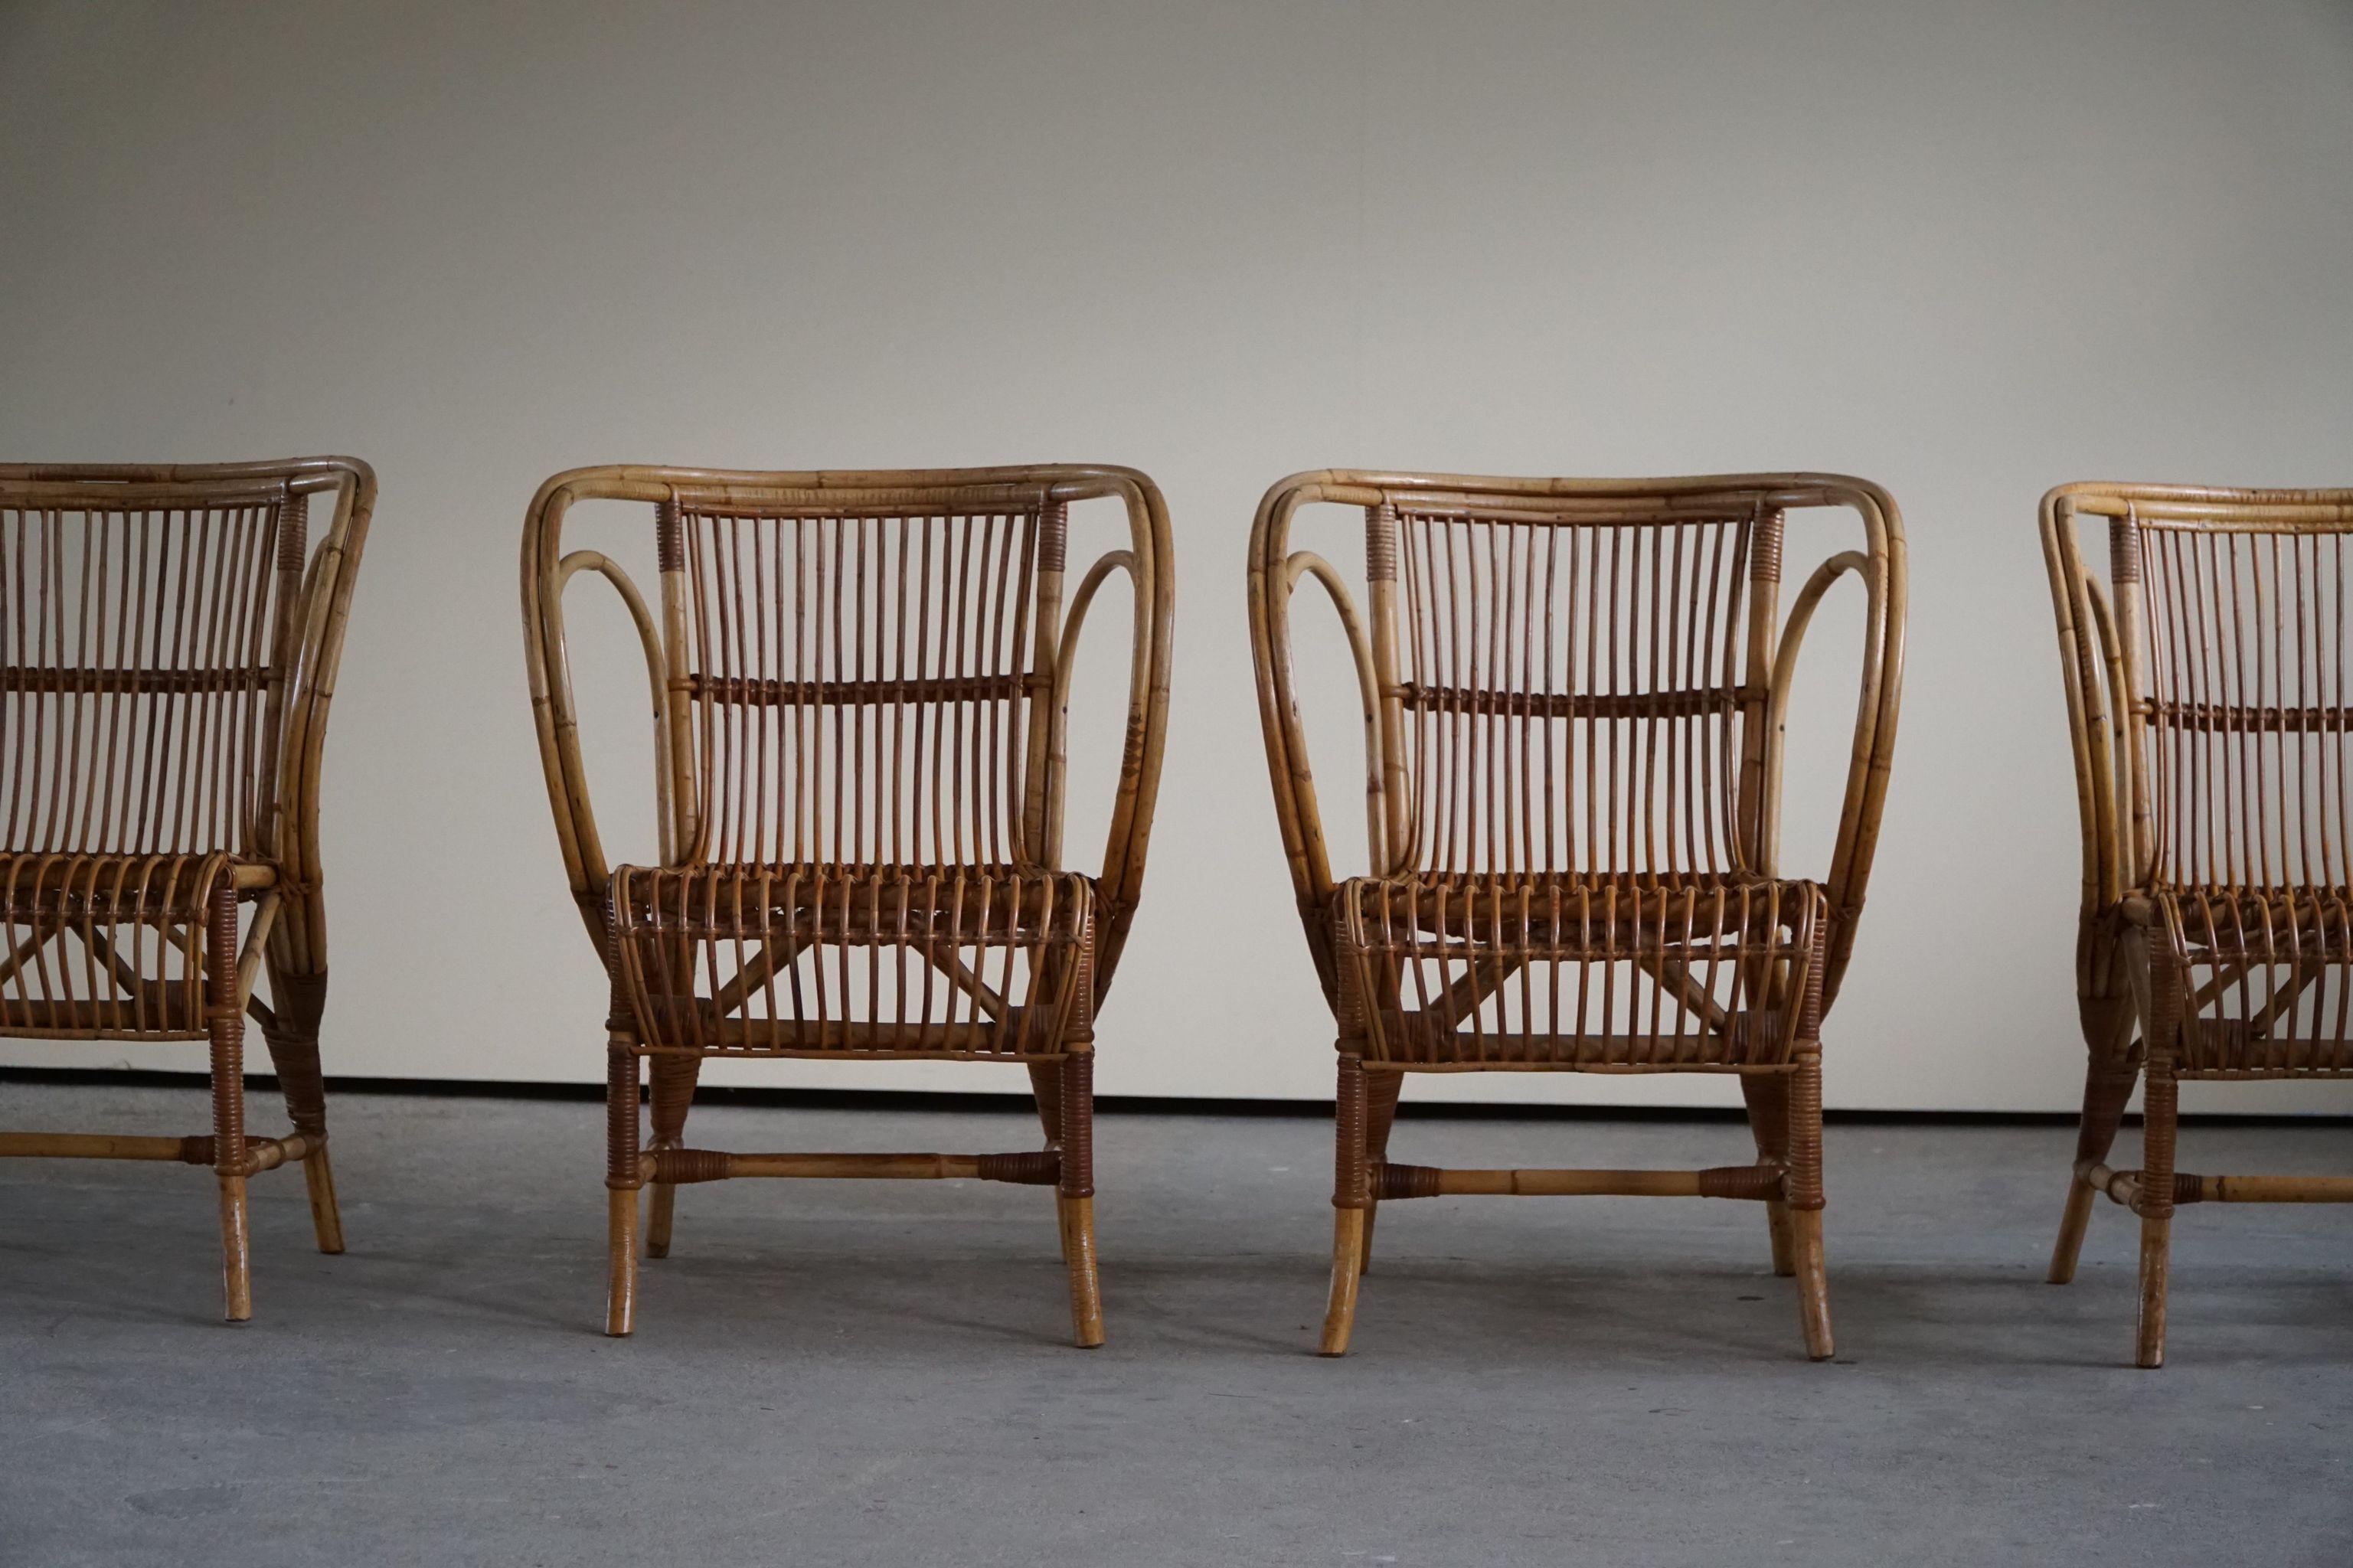 Bamboo Mid-Century Danish Dining Chairs in Wicker, by Robert Wengler, Set of 4, 1960s